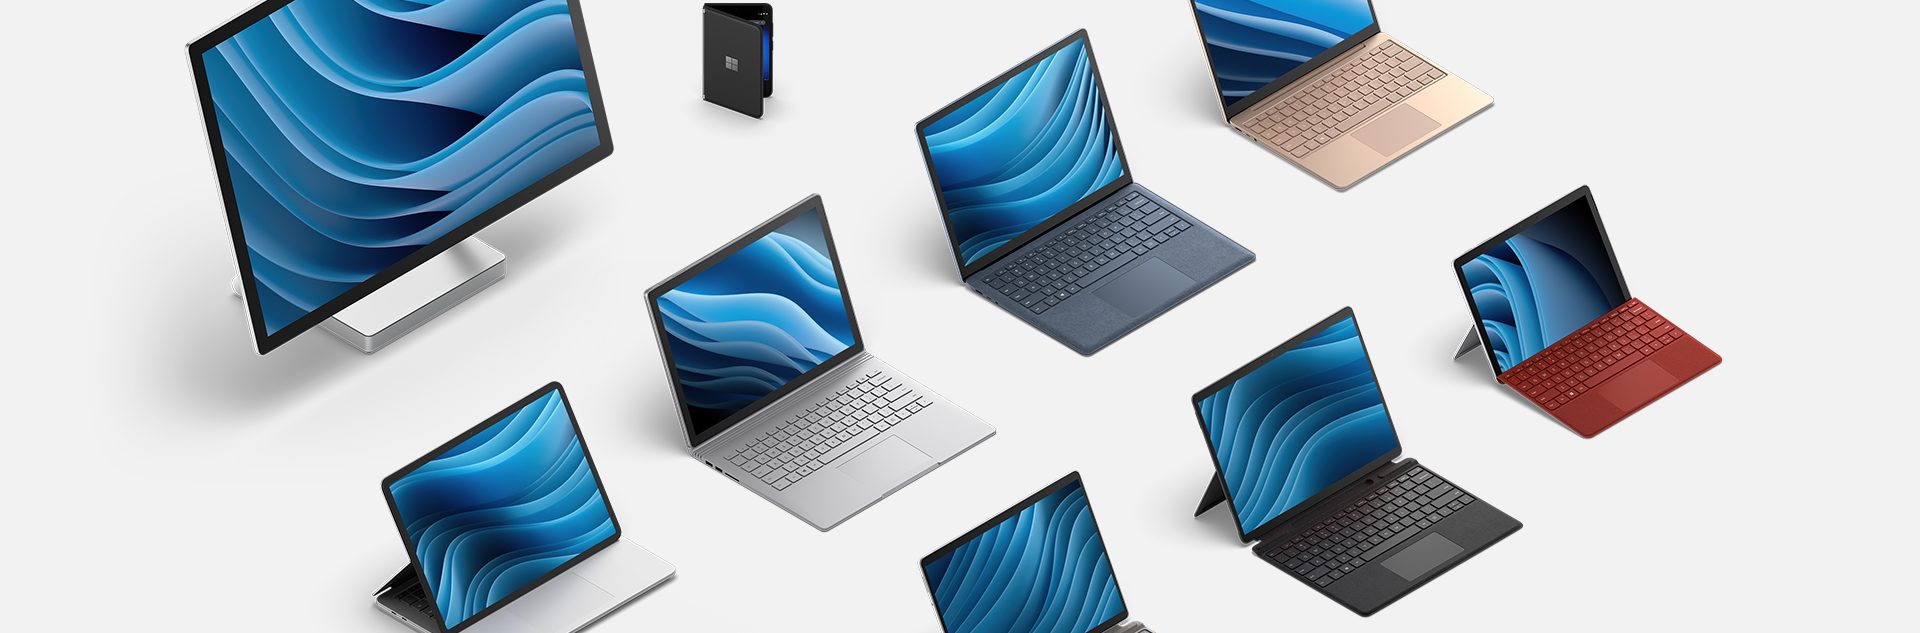 surface products